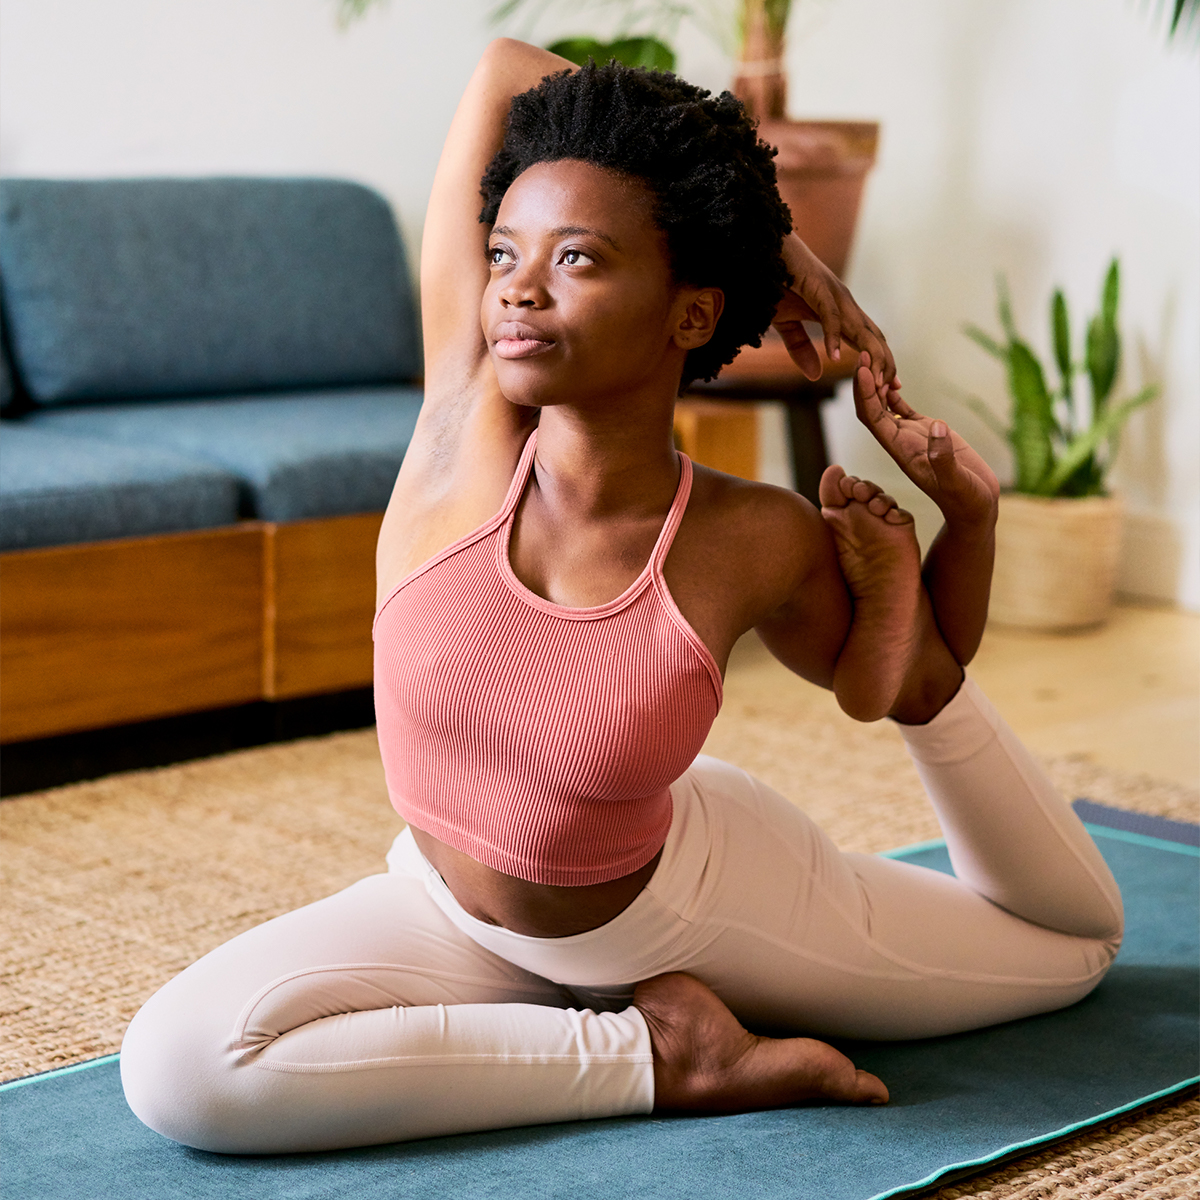 Pilates vs. Yoga: Which Workout Has More Benefits? Experts Share